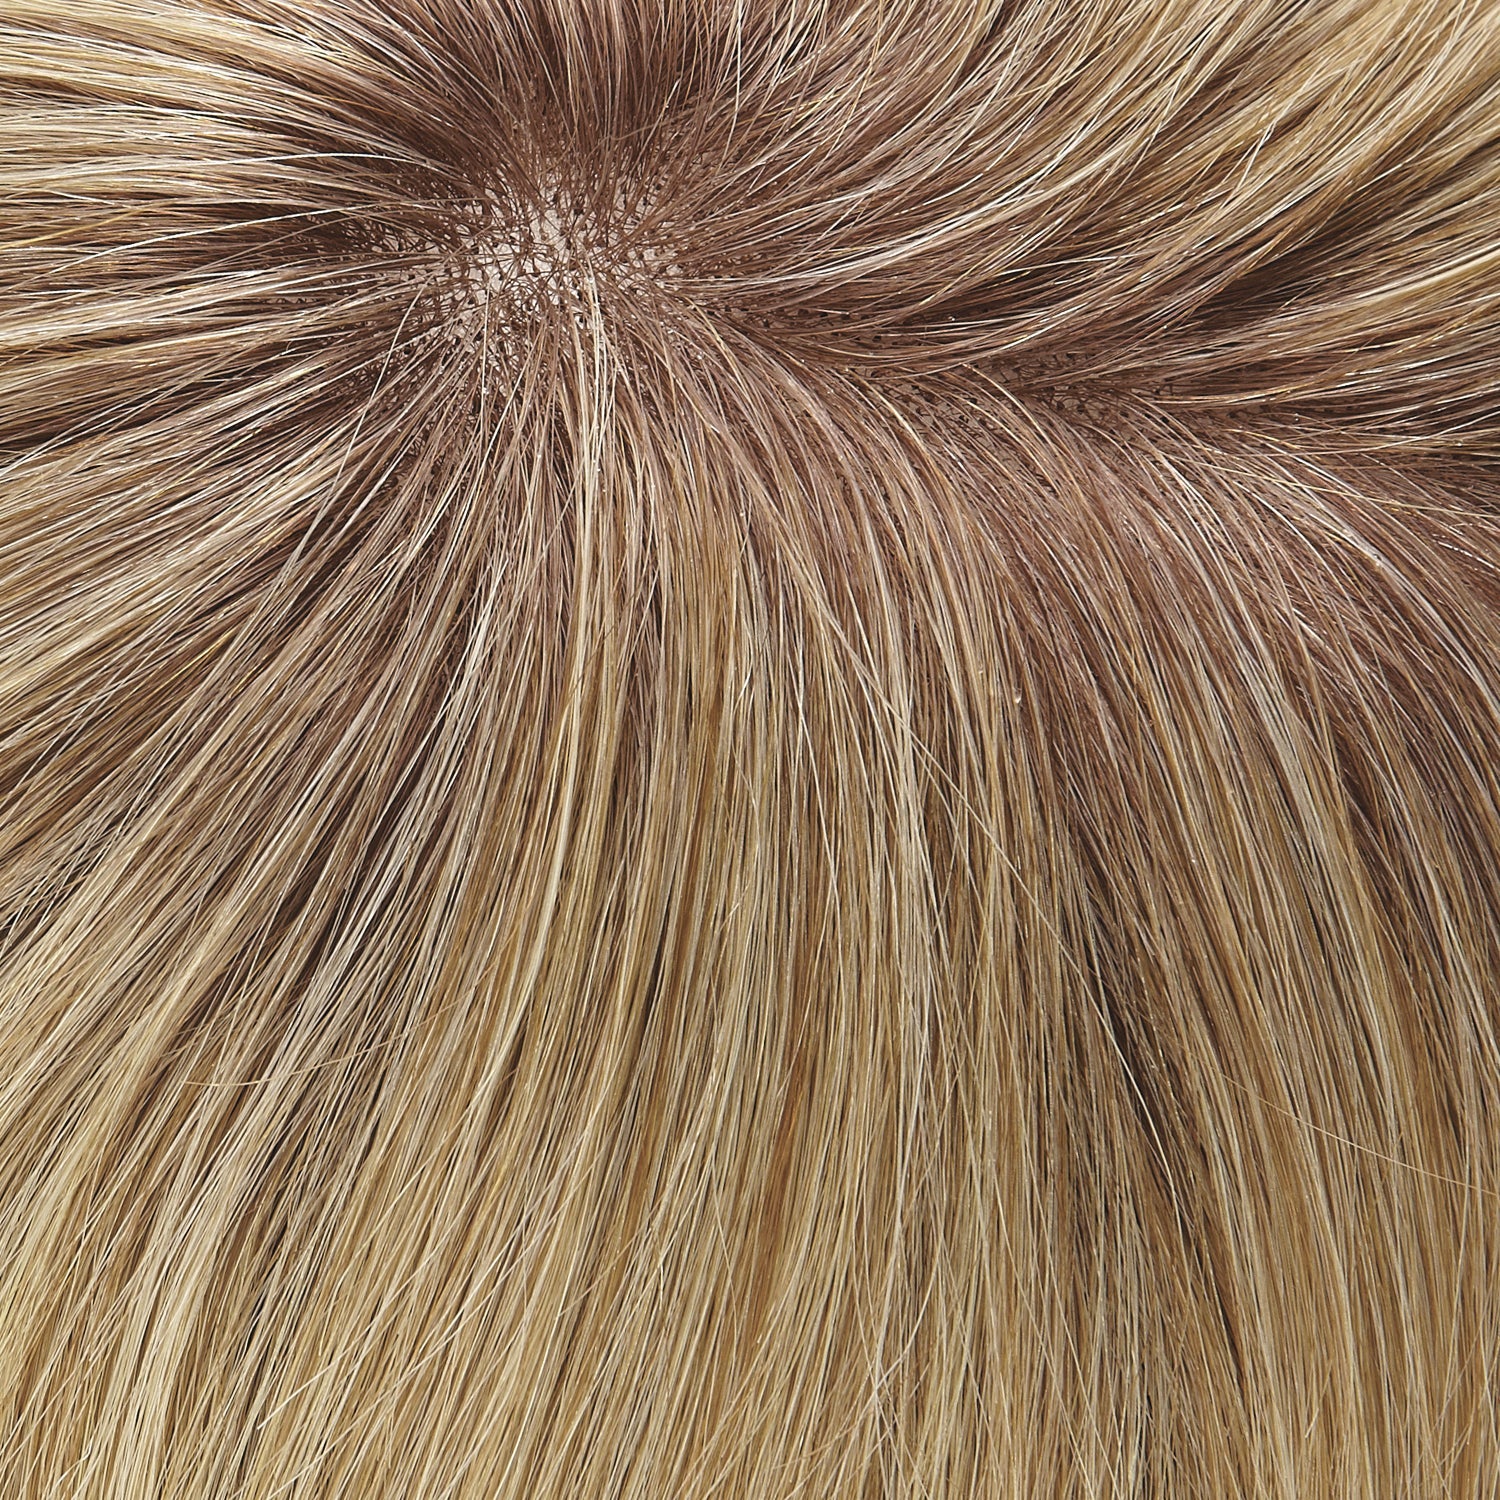 27T613S8 medium natural red golden blonde pale natural gold blonde blend tipped rooted medium brown